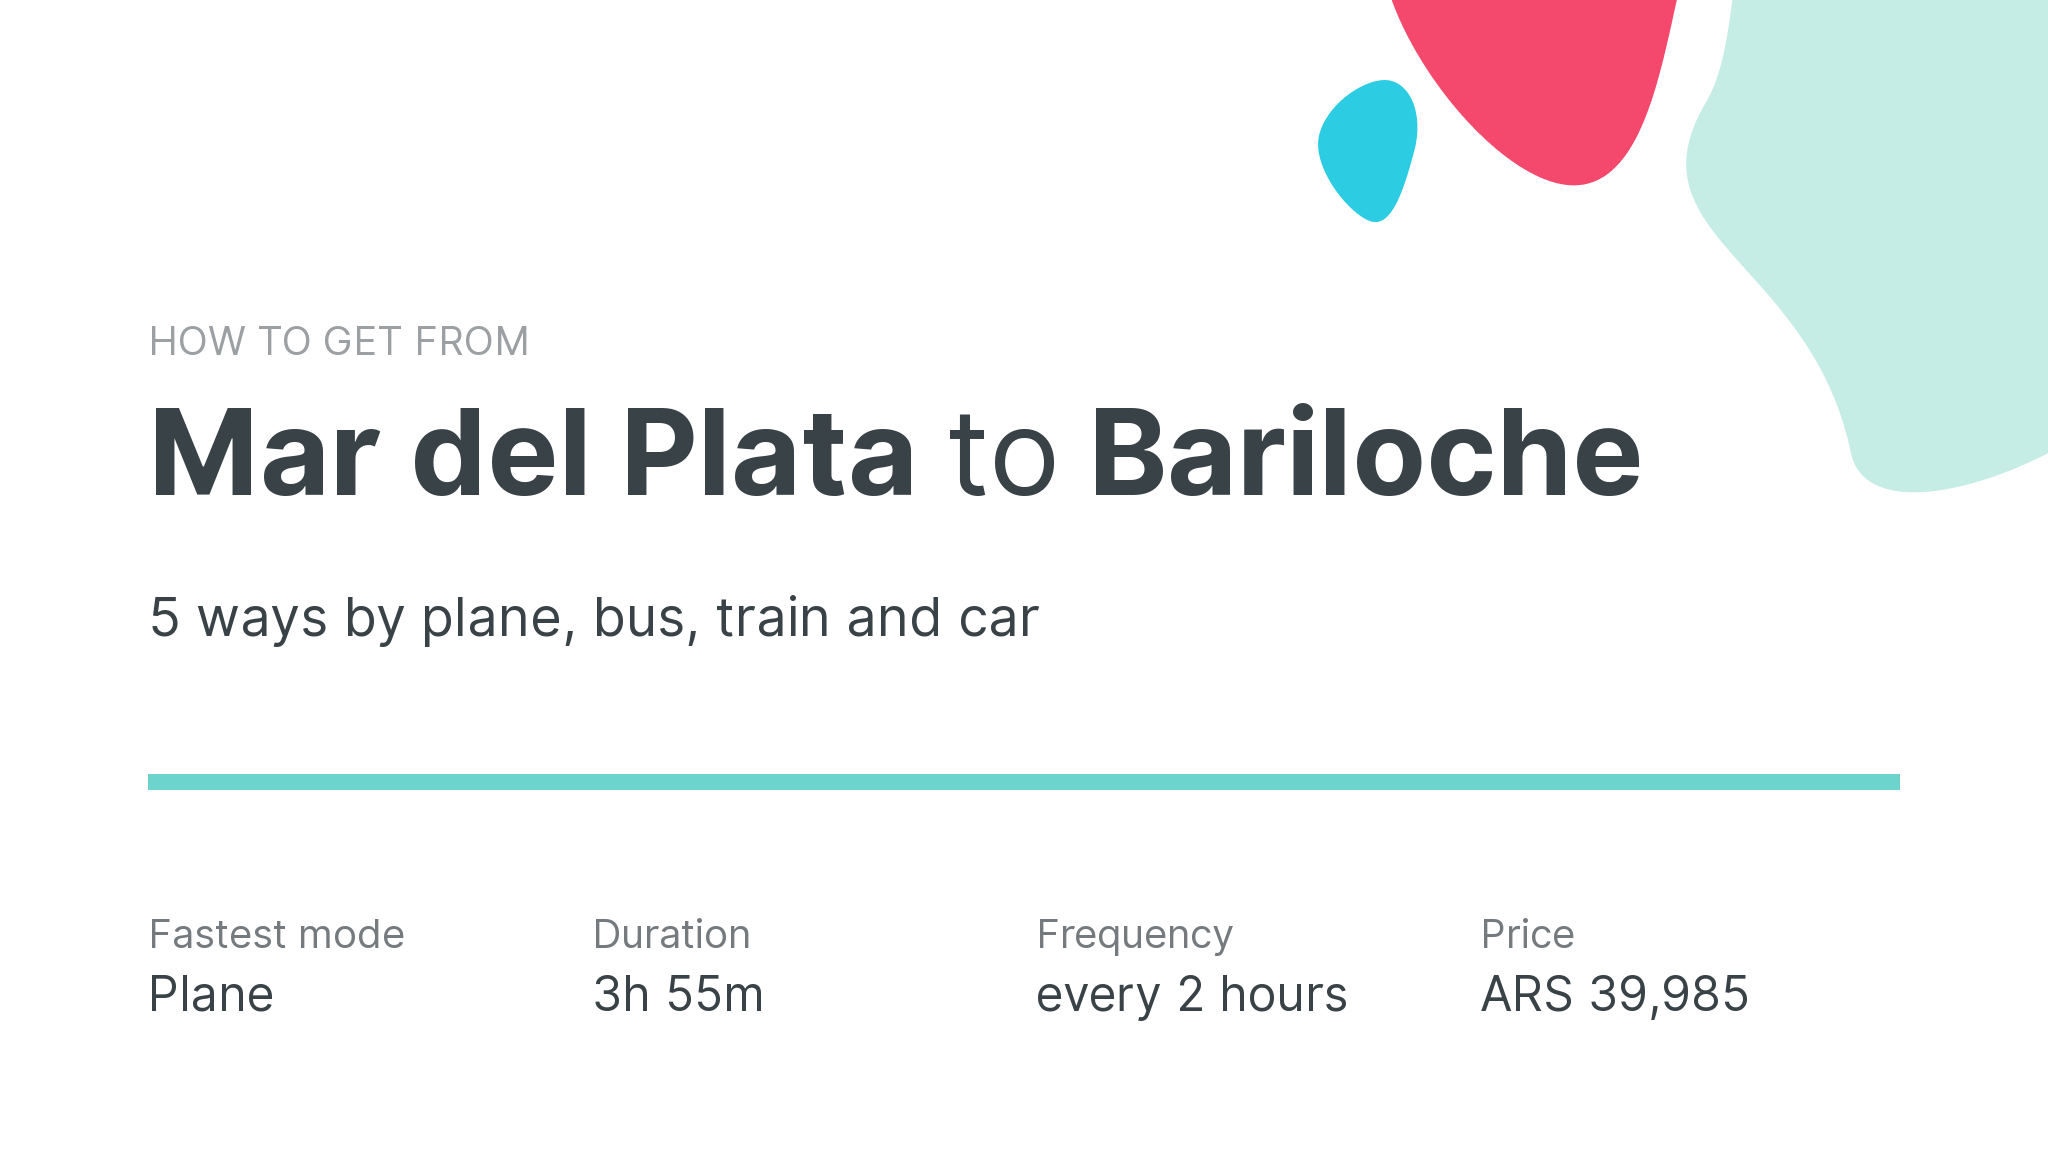 How do I get from Mar del Plata to Bariloche